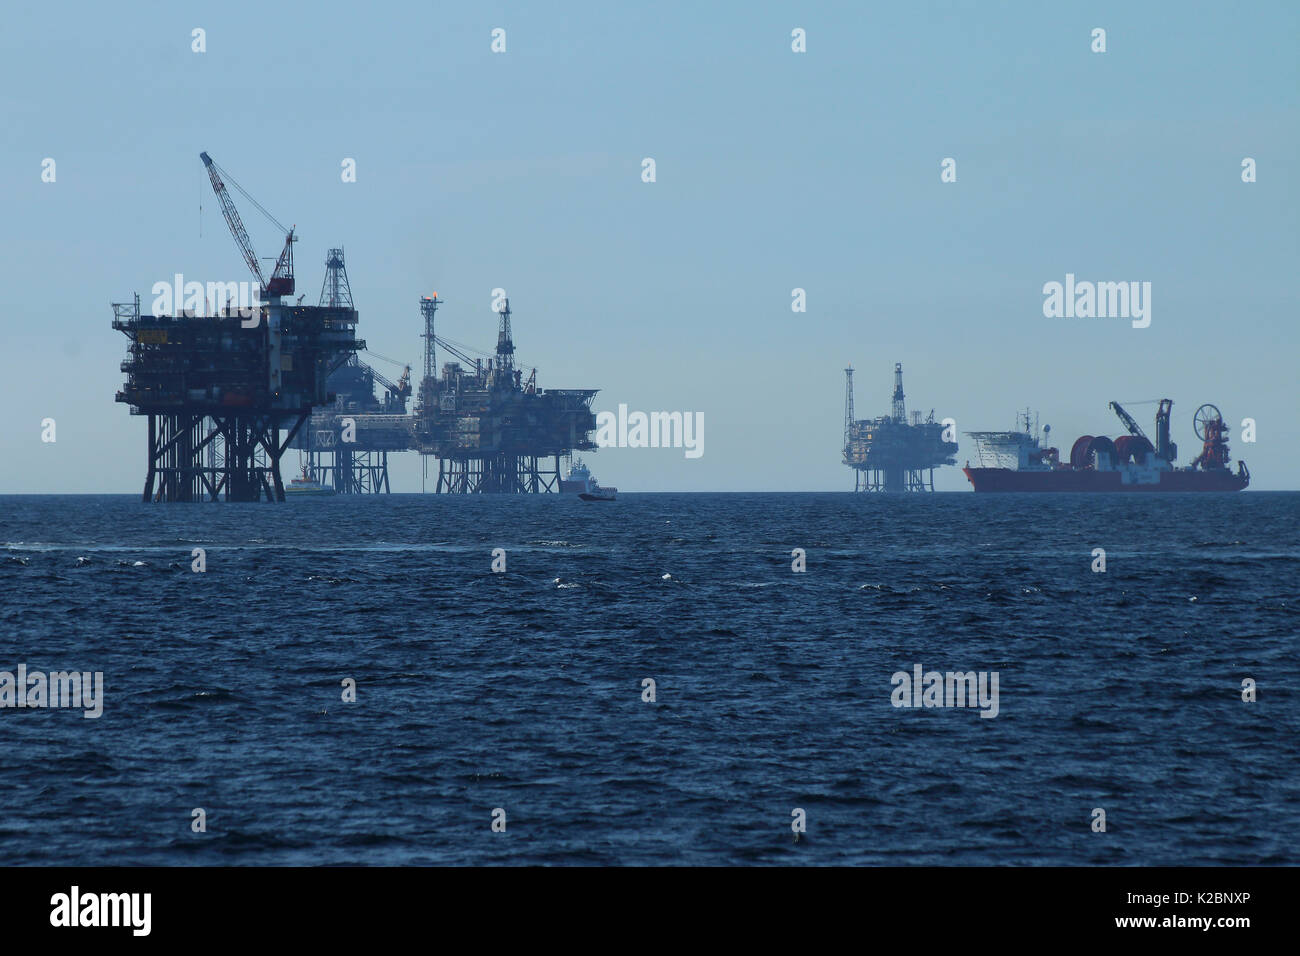 Forties oil field, approx 100 miles east of Aberdeen, Scotland, UK. September 2015. Stock Photo